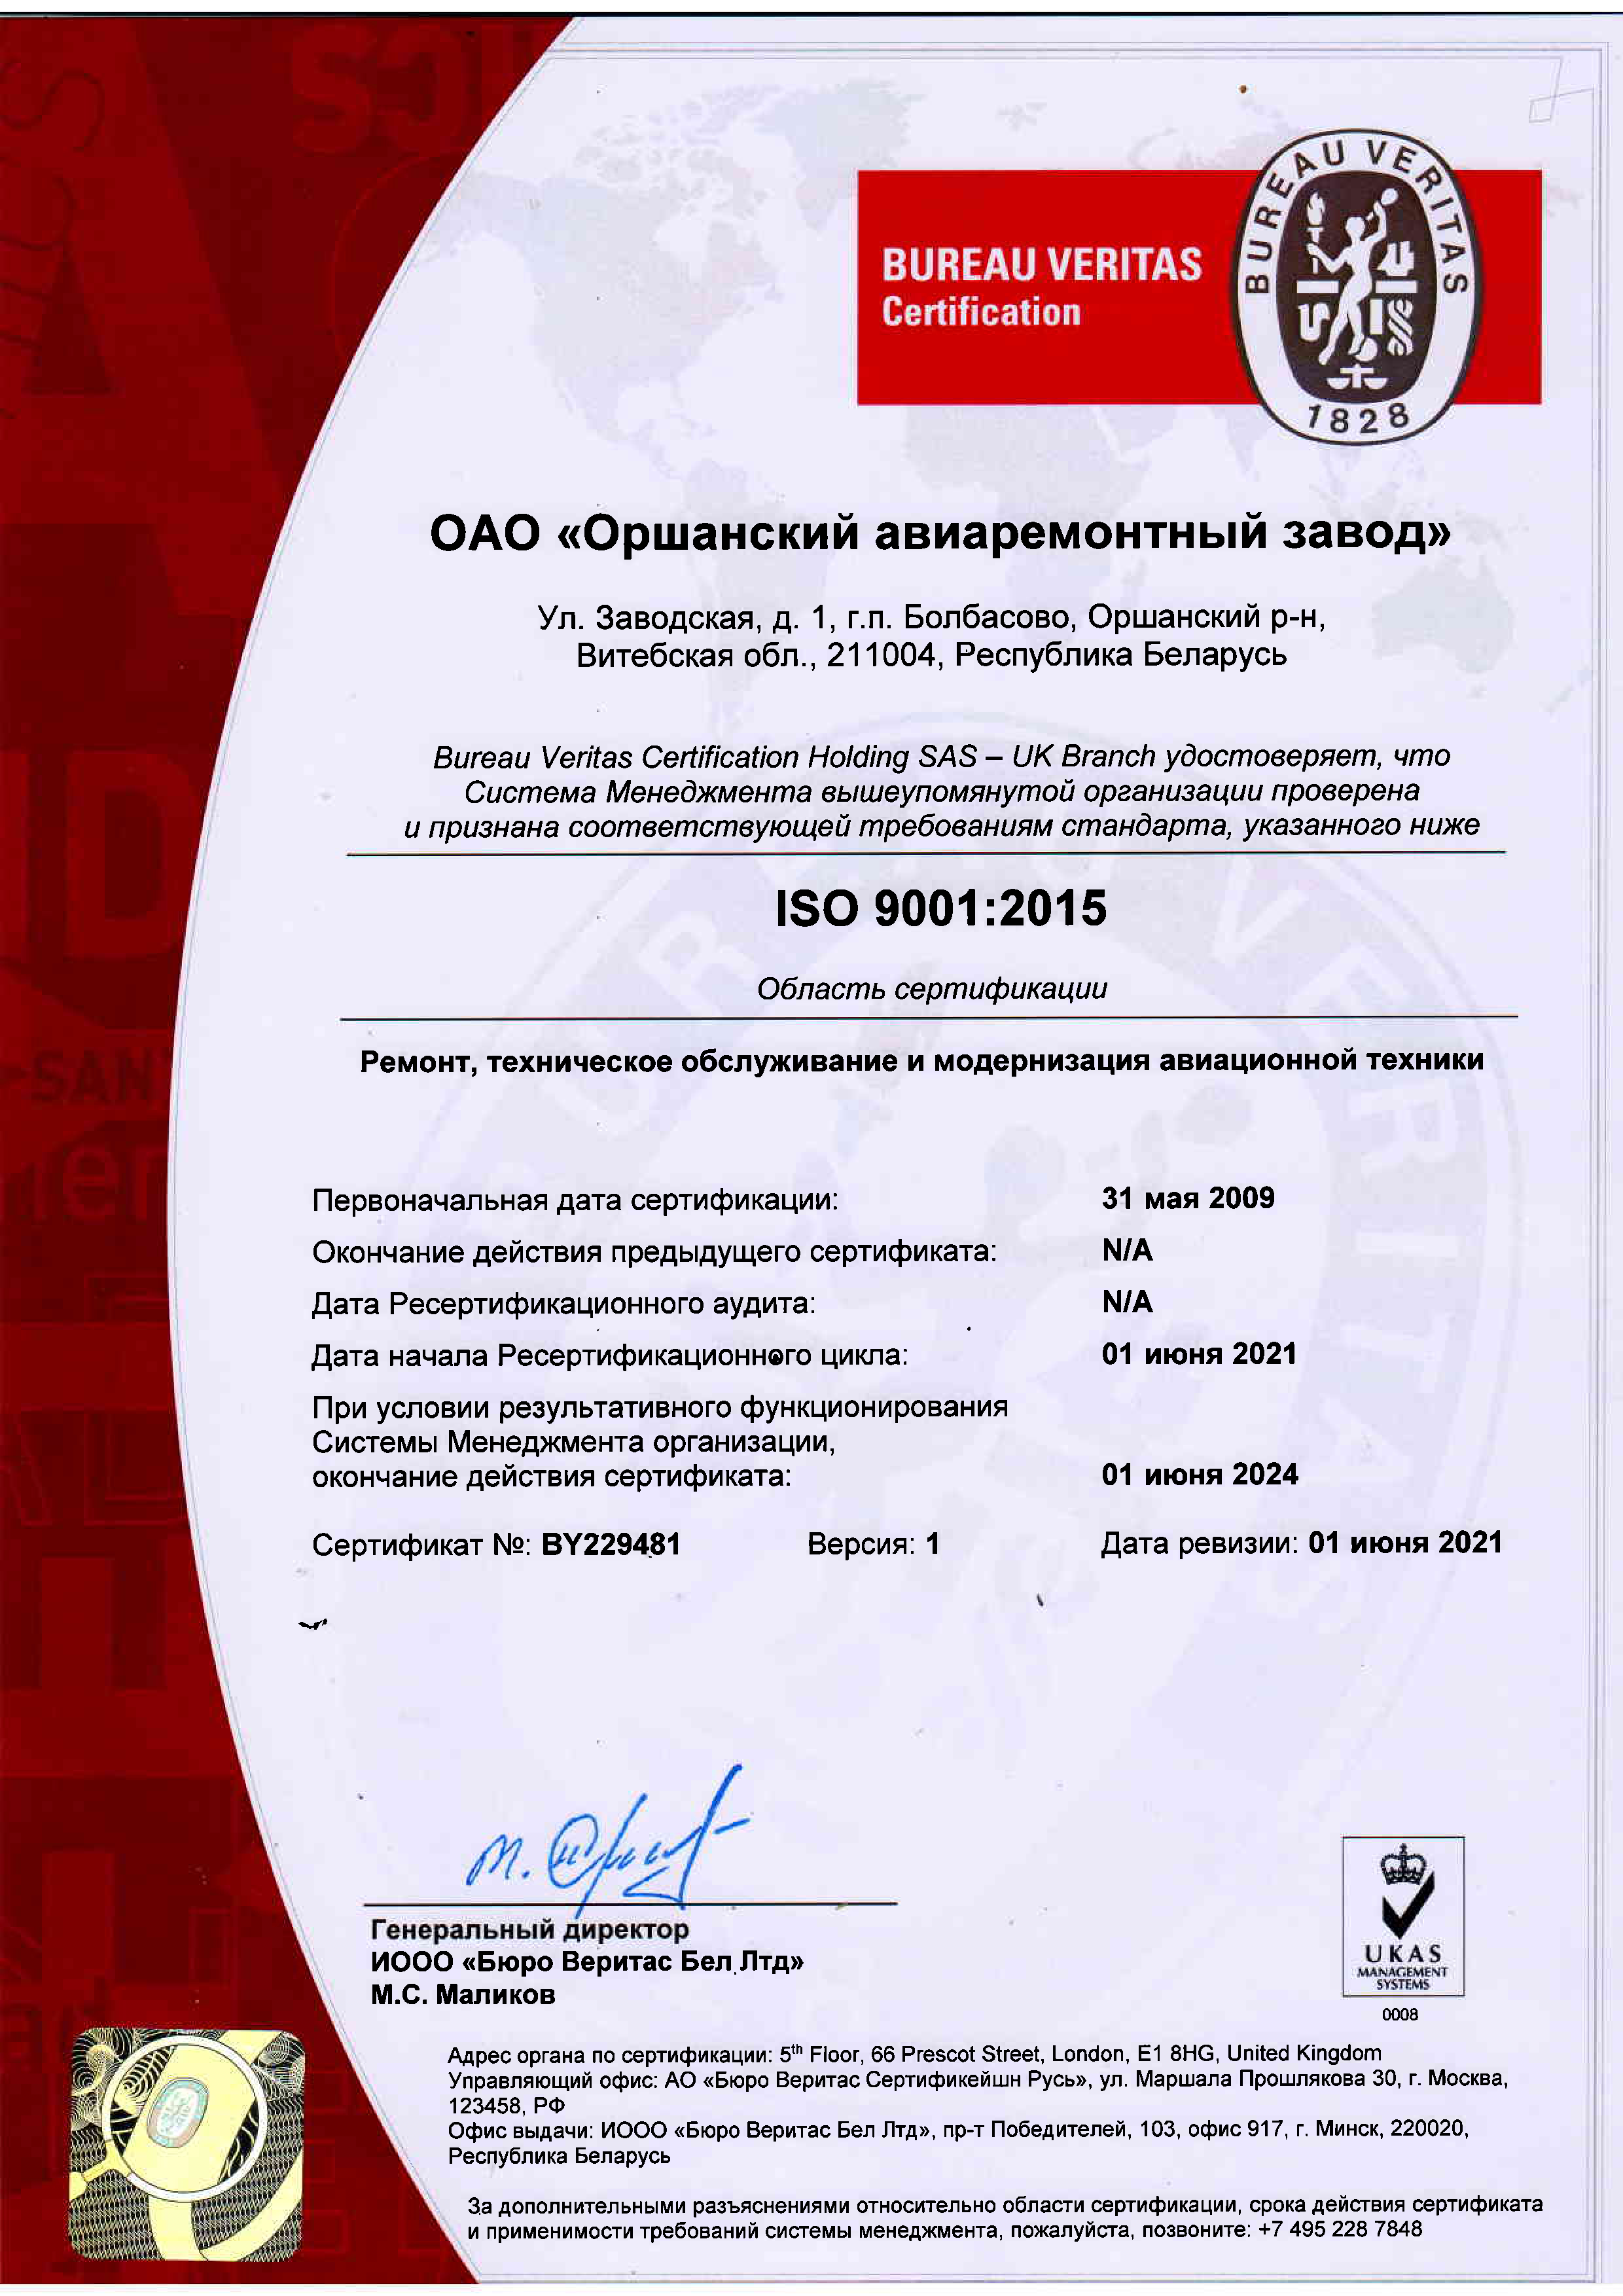  ISO 9001: 2015 certificate